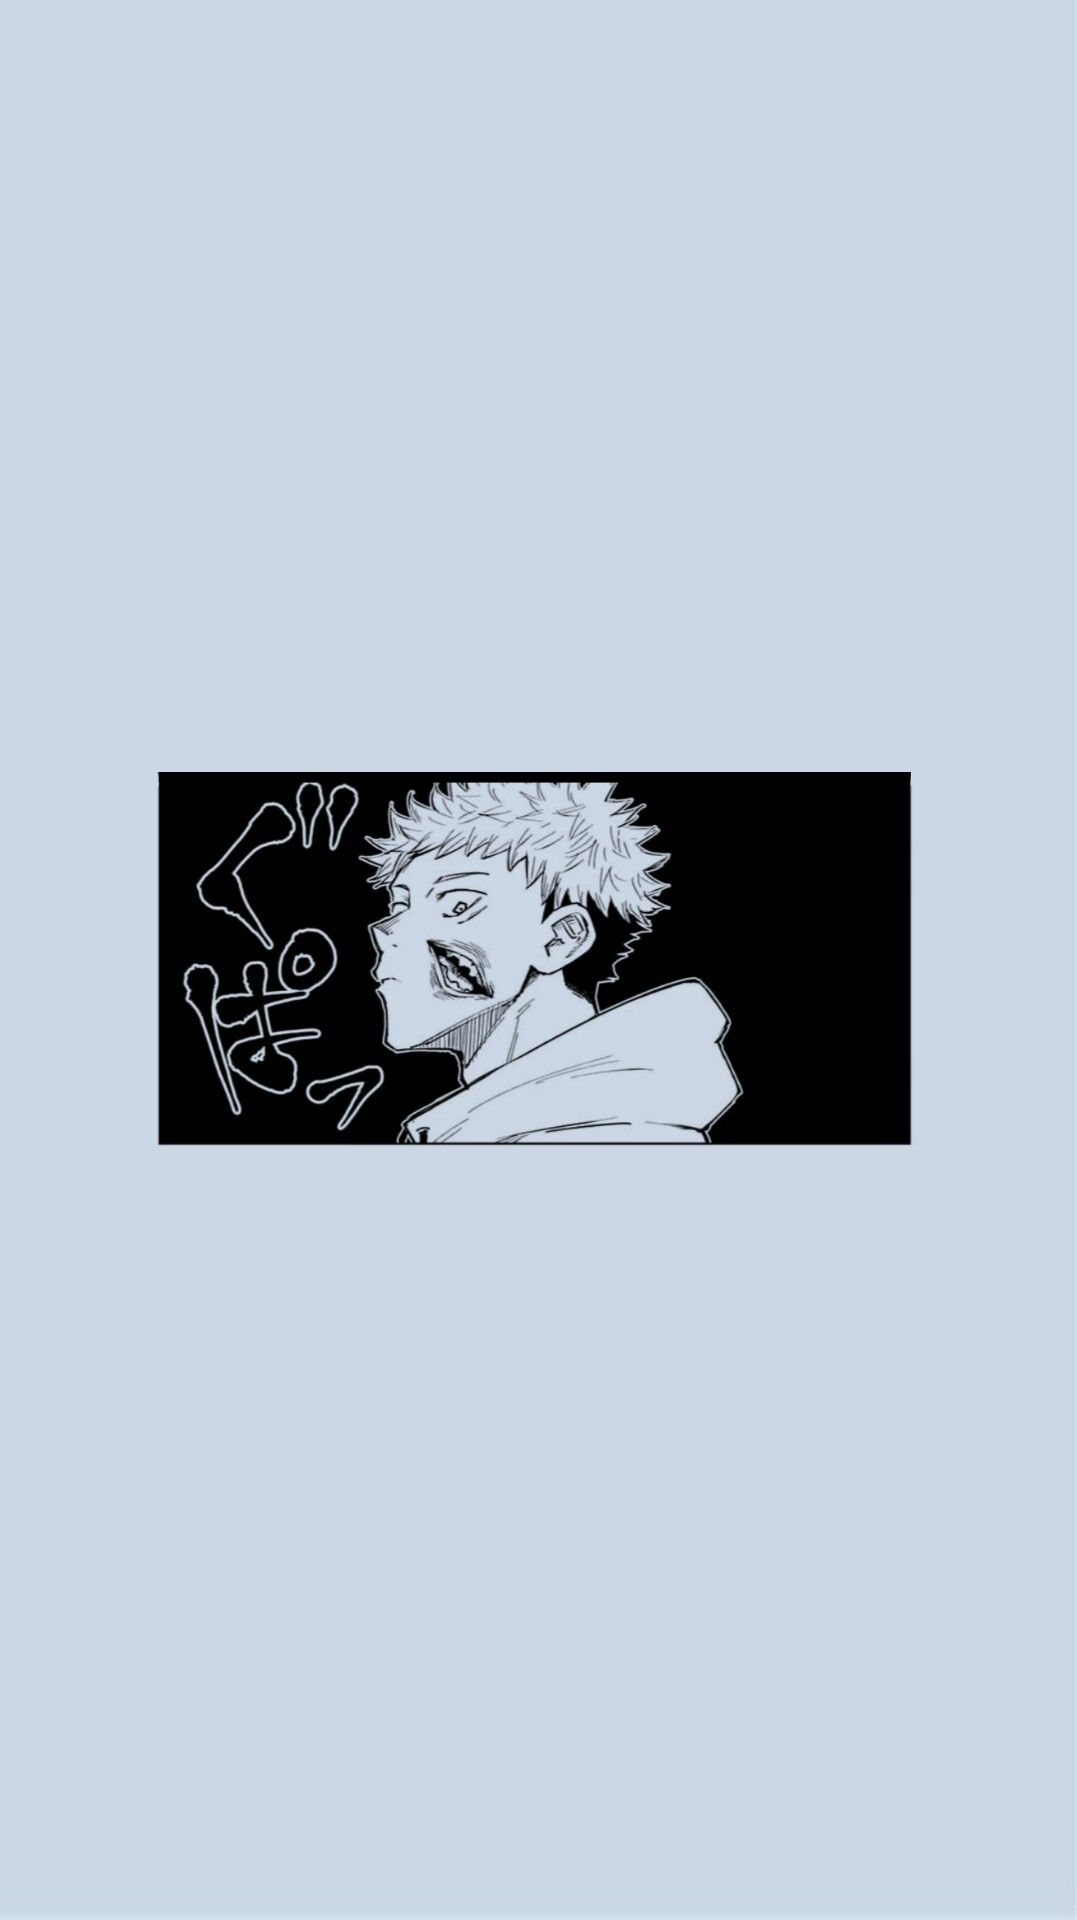 uwu Can I request some Jujutsu Kaisen Wallpapers I Anime